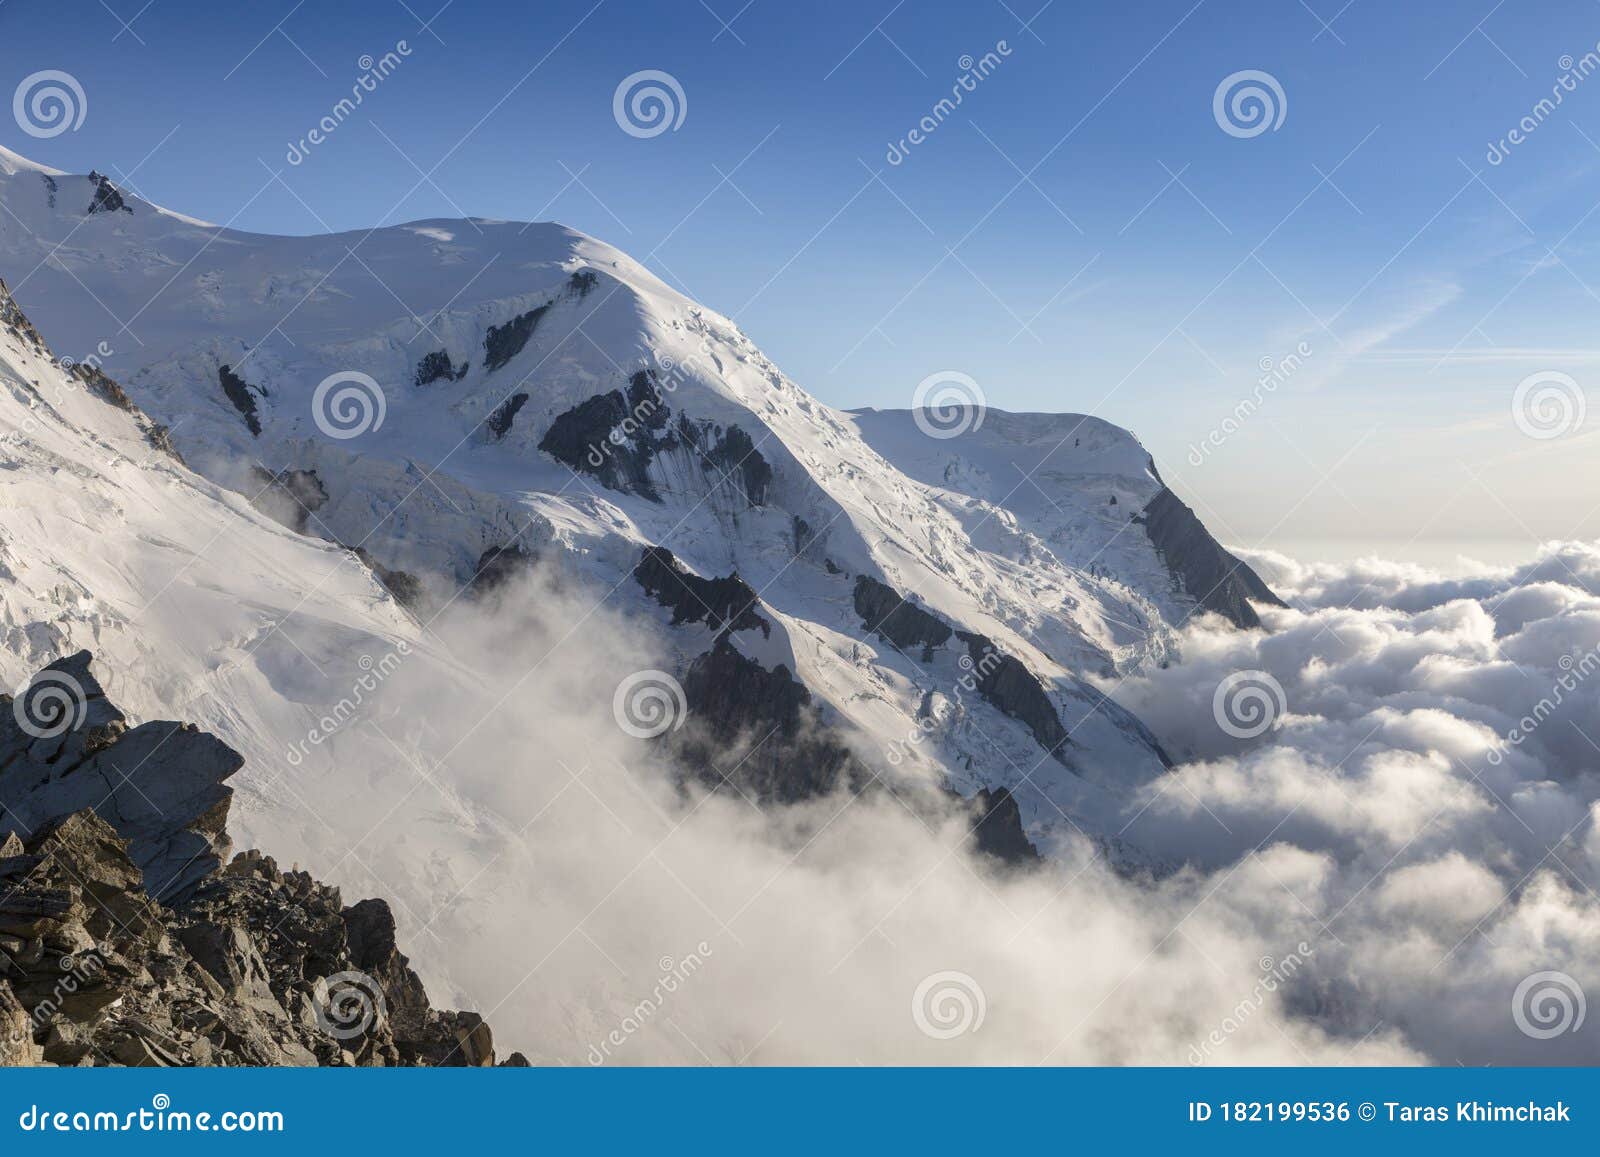 clouds and fog near dome du gouter and bosson glacier mont blanc massif in the french alps. view from the cosmique refuge,